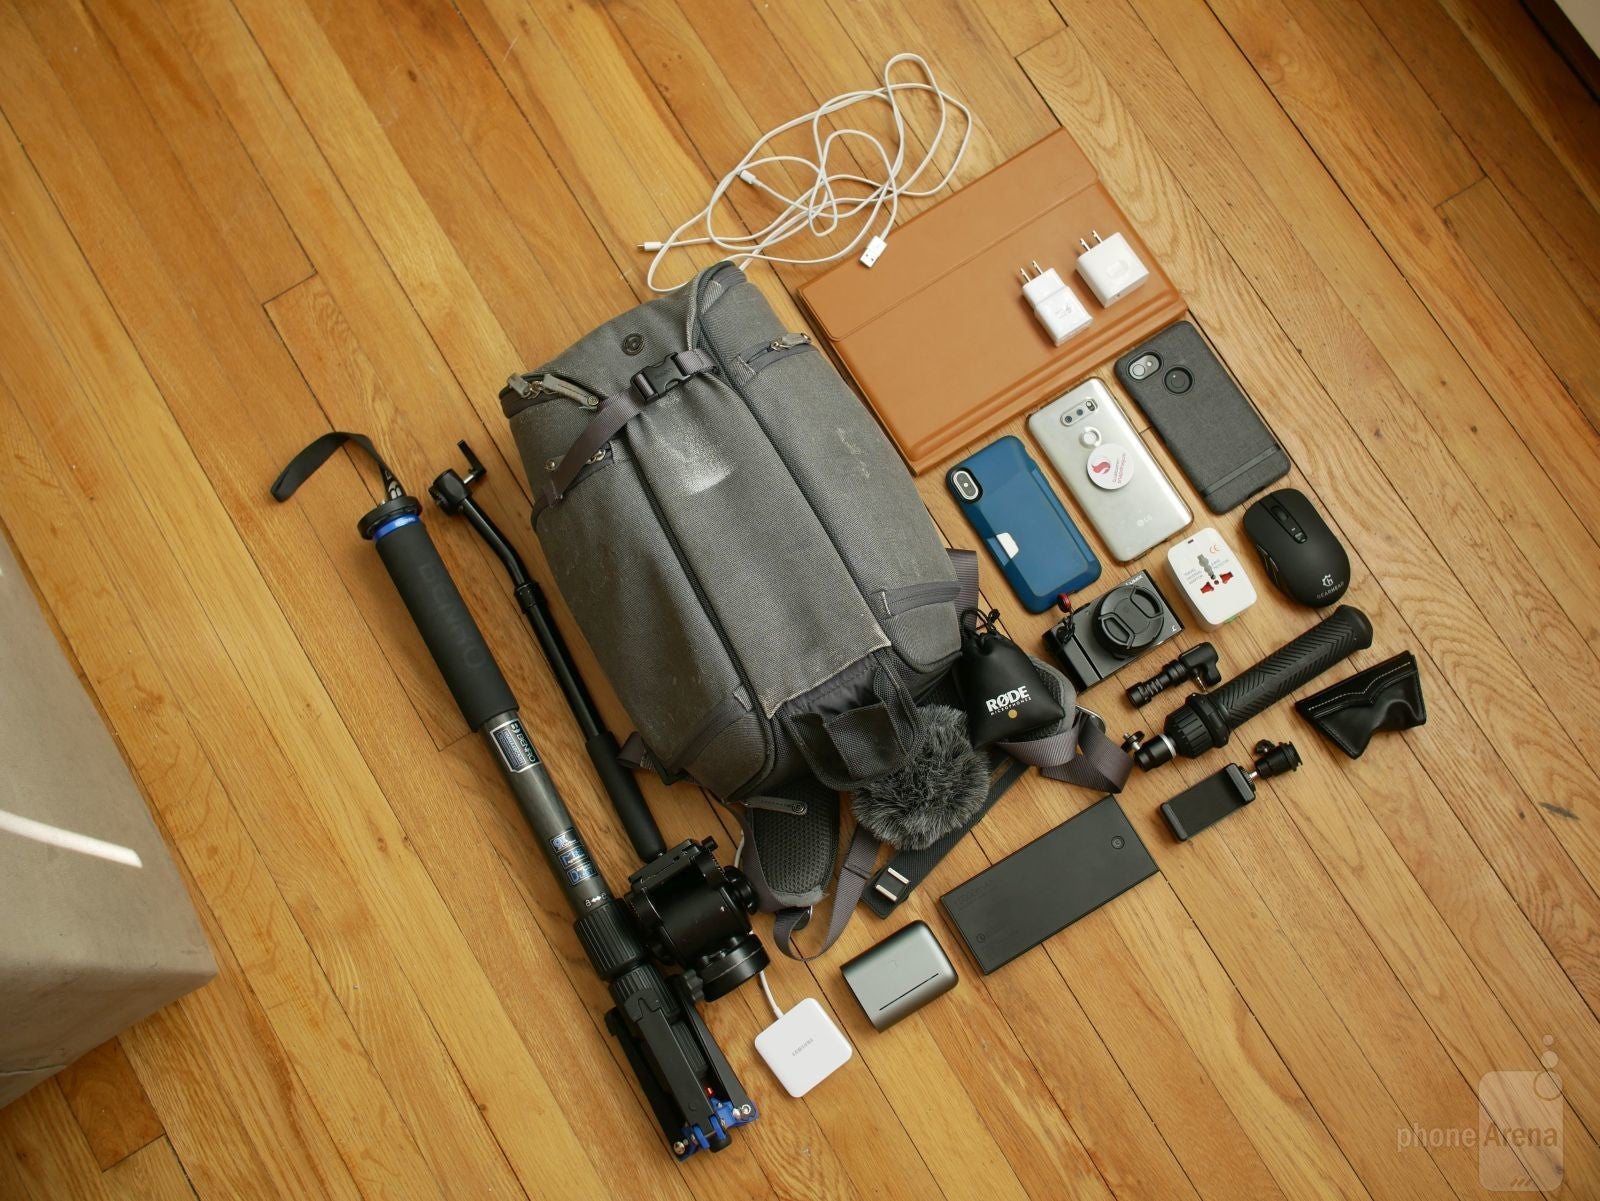 What's in my bag for MWC 2018?